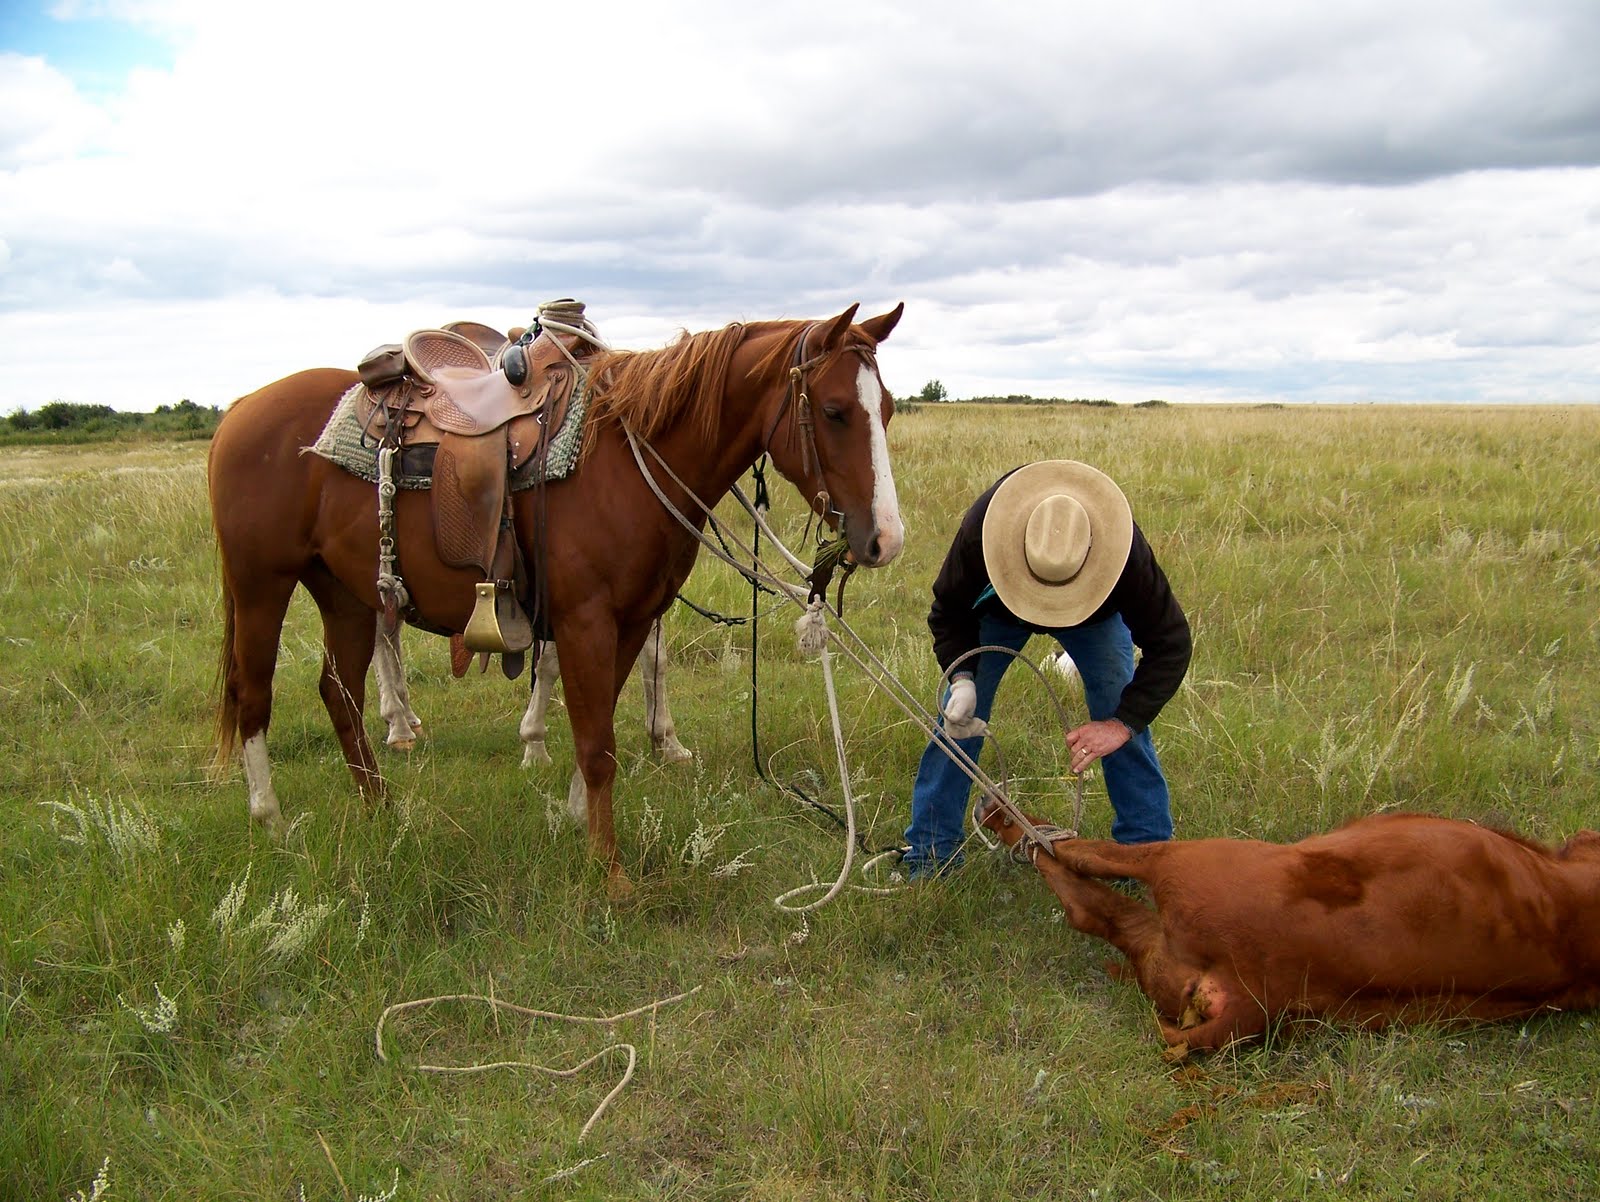 Cowboy-Coping Cowgirl: Warning: Pictures of a Good Cow Horse